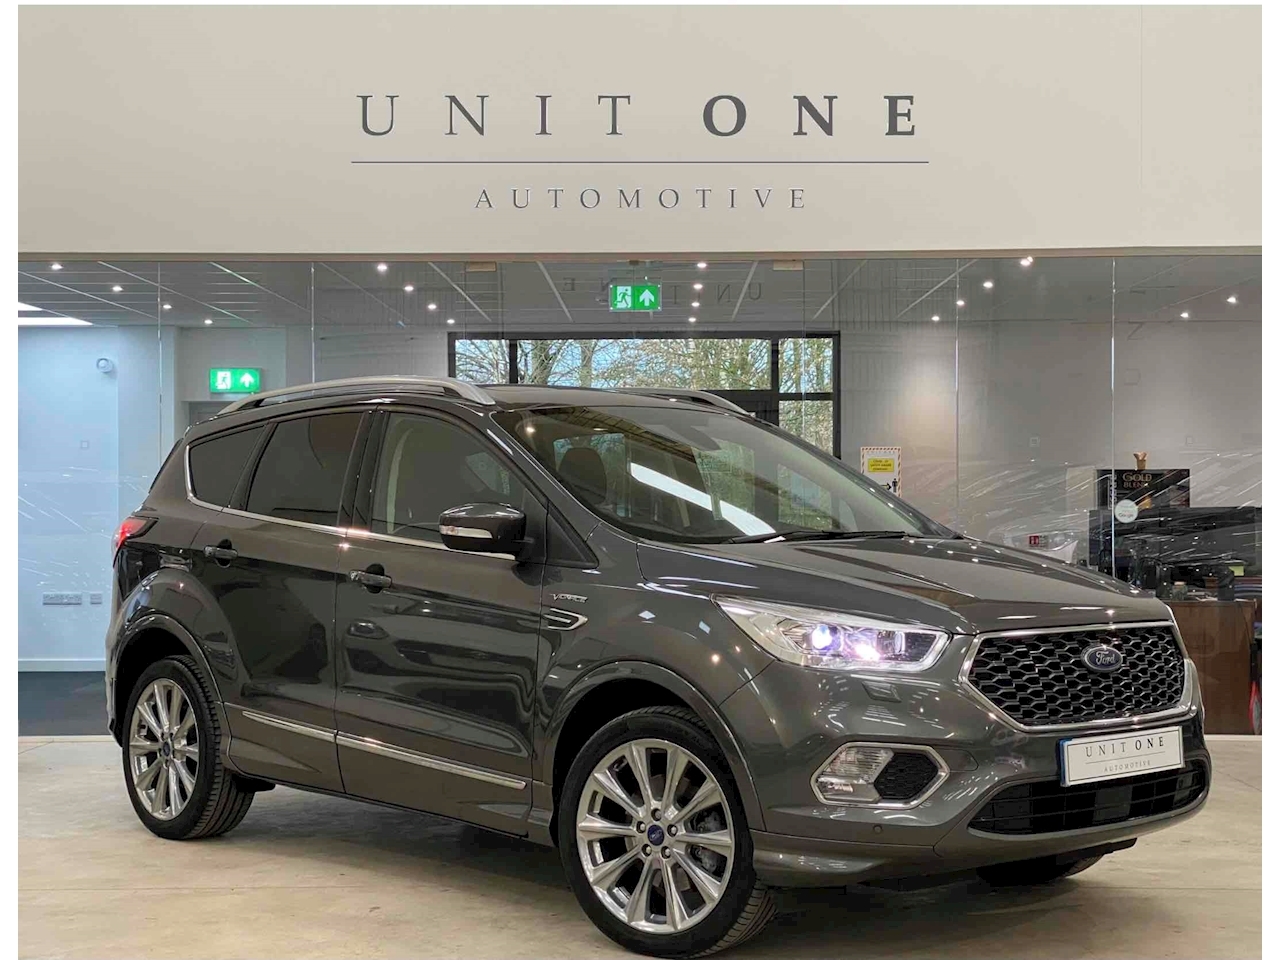 2.0 TDCi EcoBlue Vignale SUV 5dr Diesel Powershift AWD (s/s) (180 ps)